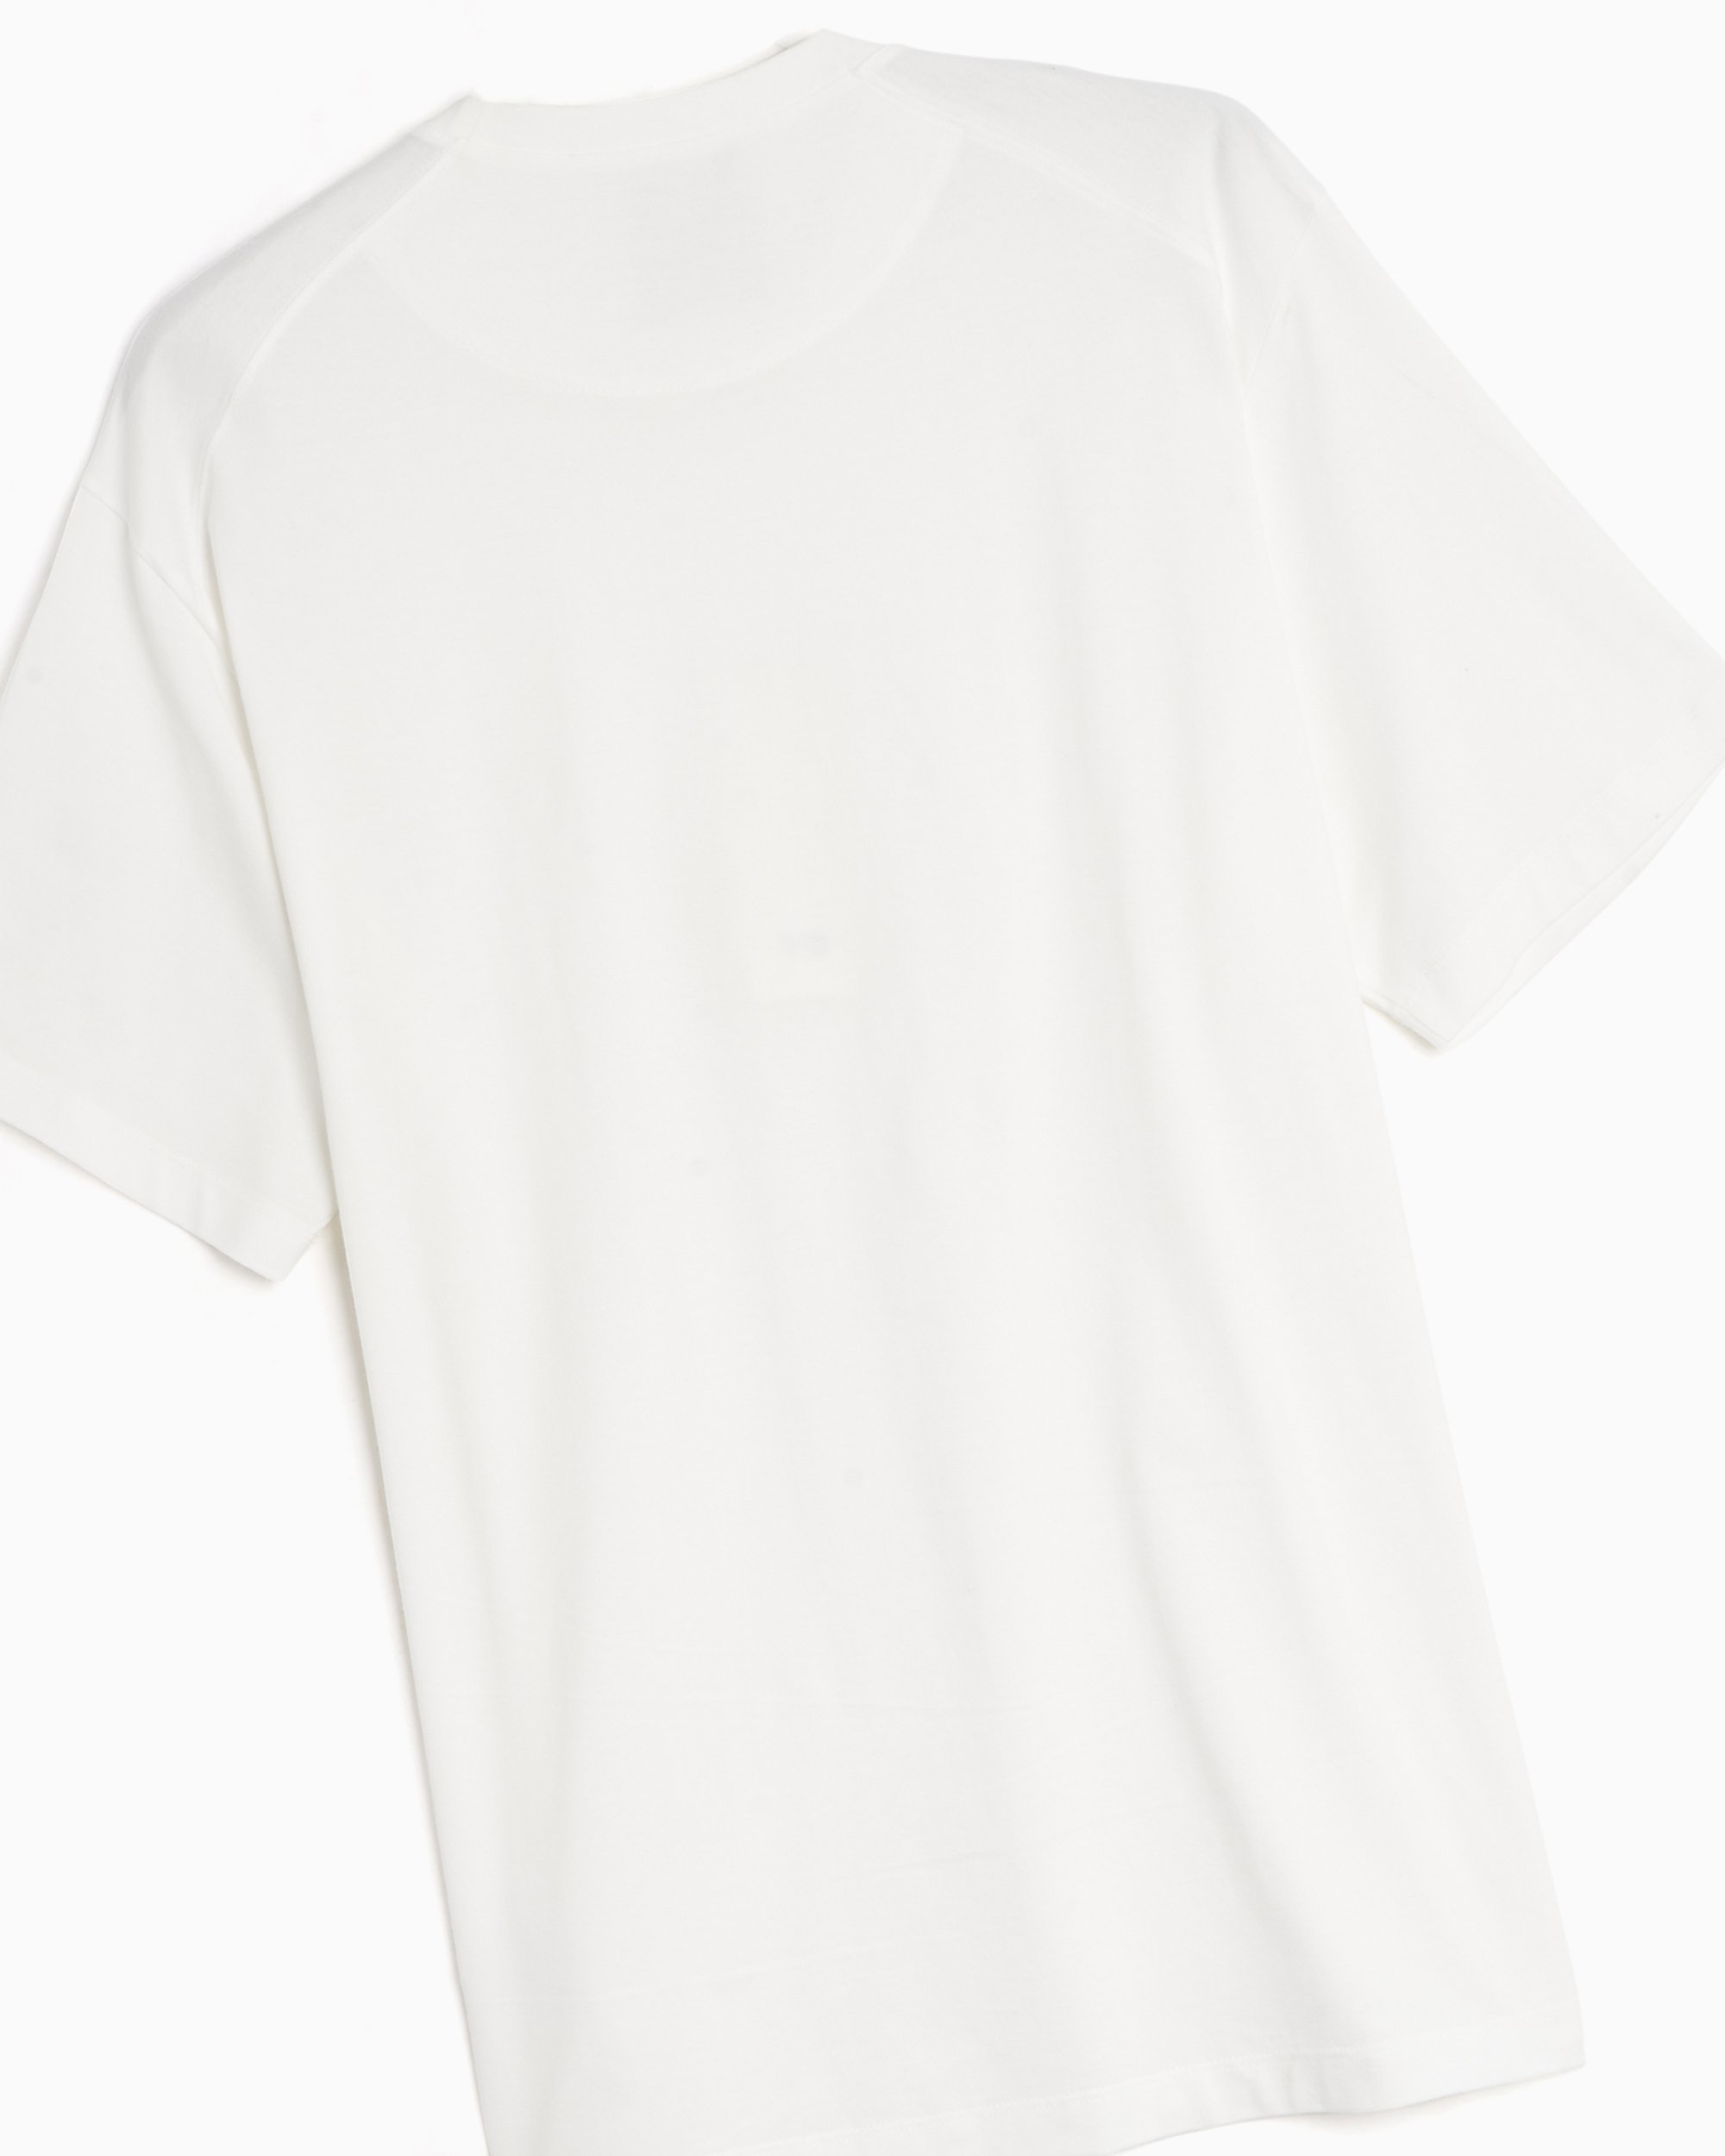 adidas Y-3 Men's T-Shirt White FN3359| Buy Online at FOOTDISTRICT